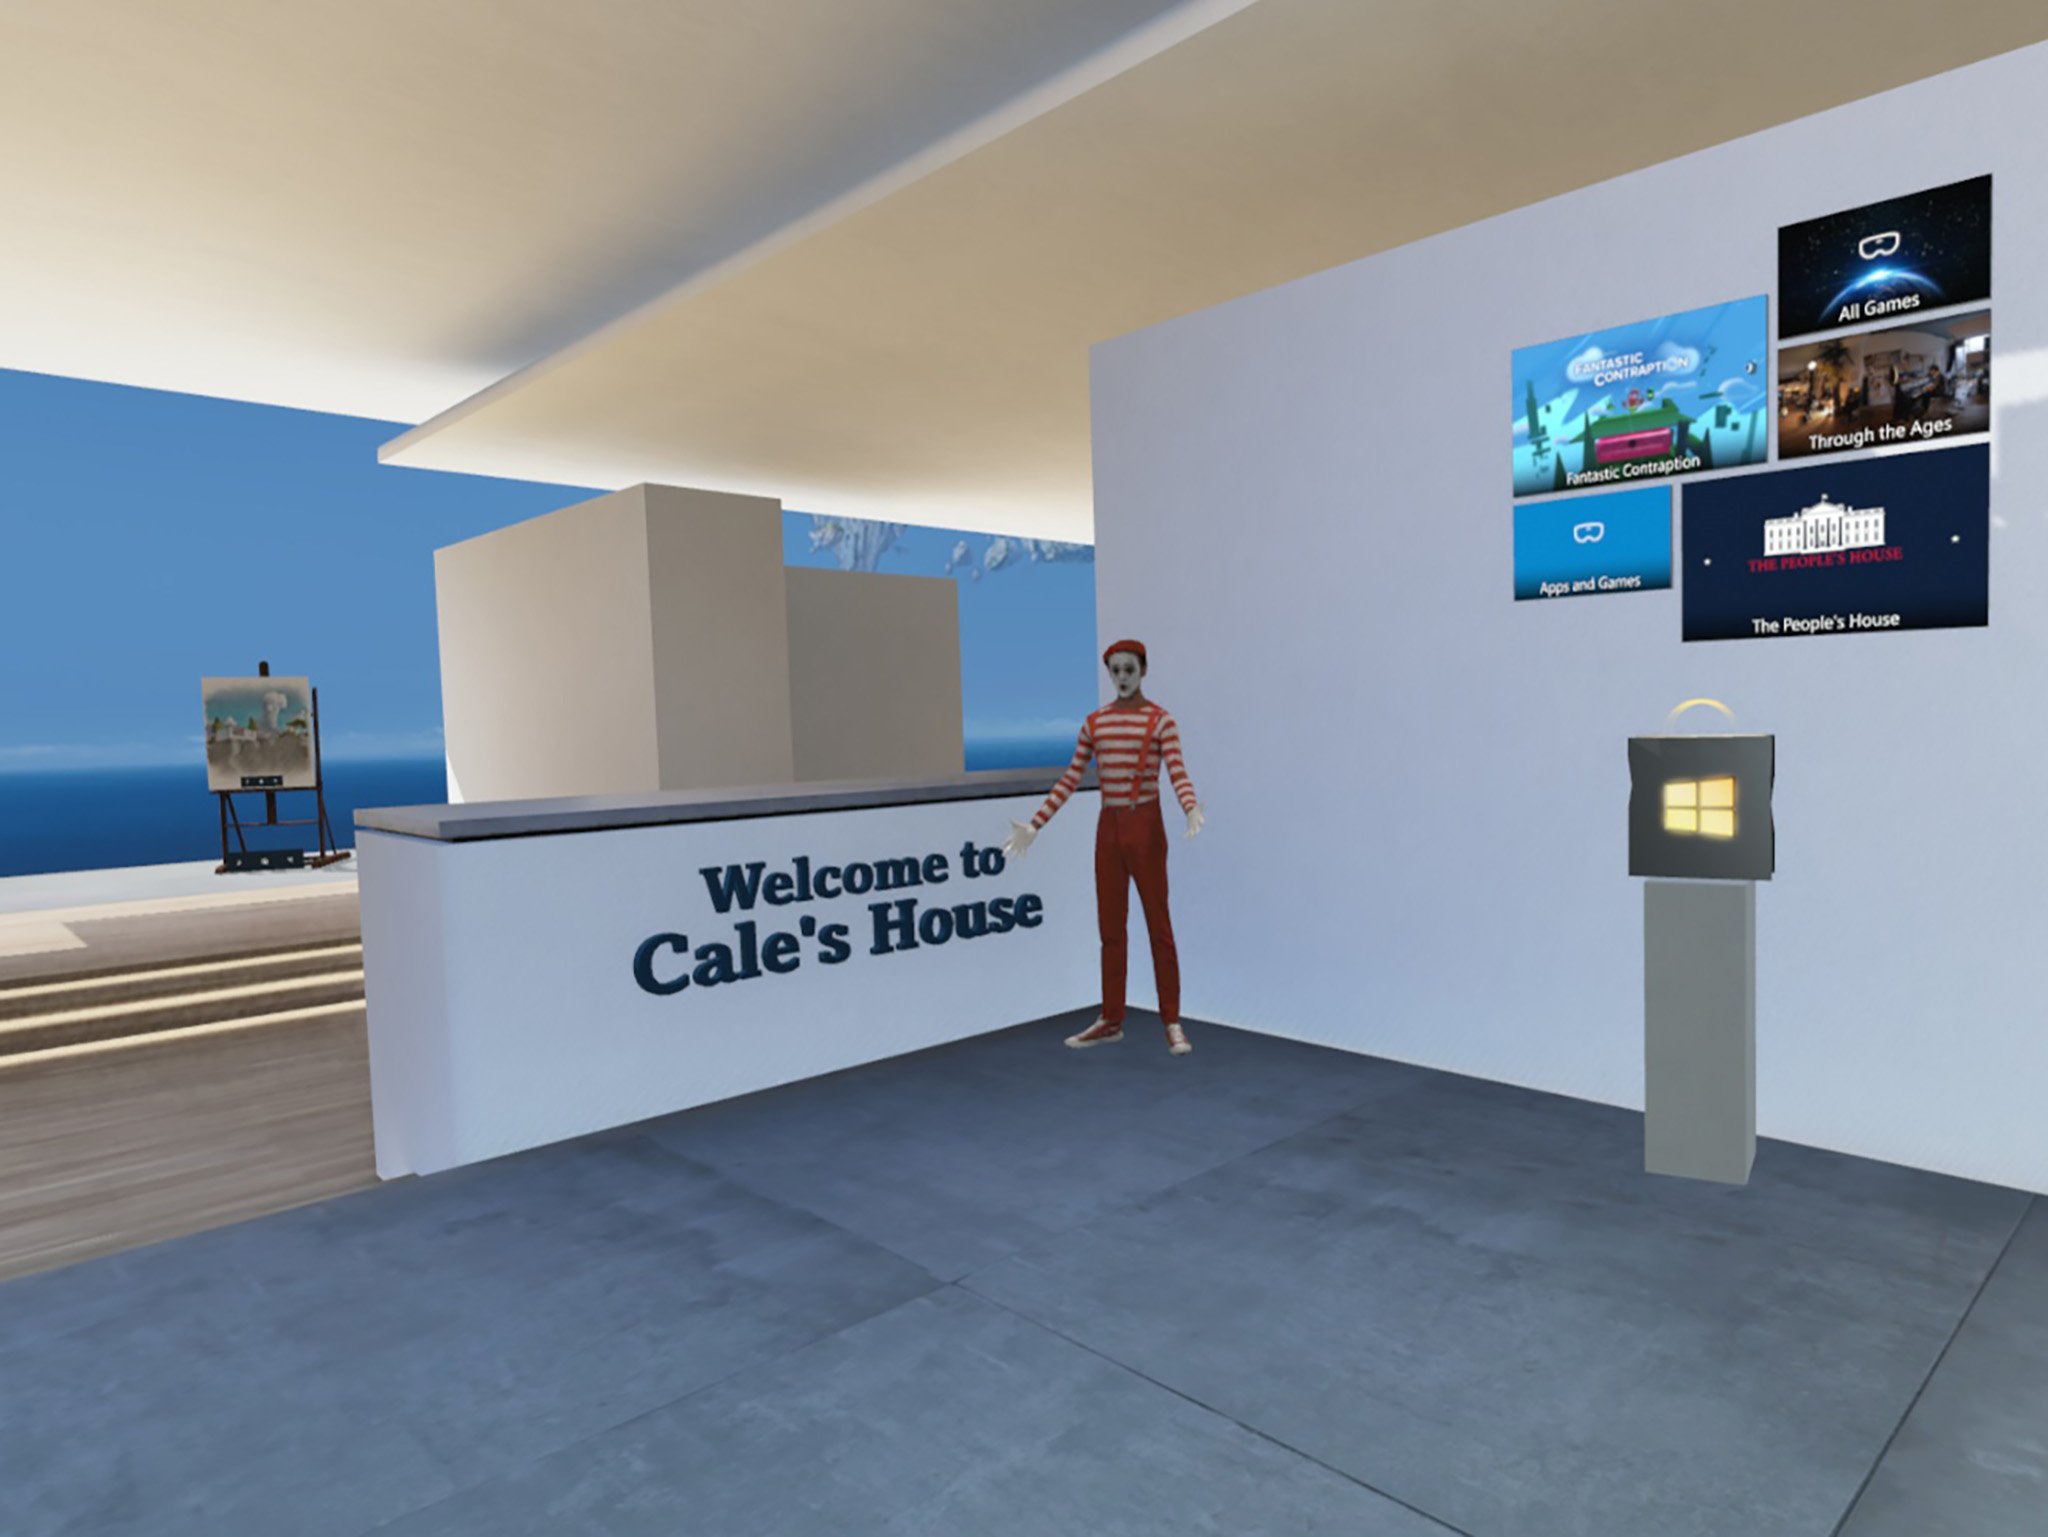 How to personalize the Windows Mixed Reality Cliff House